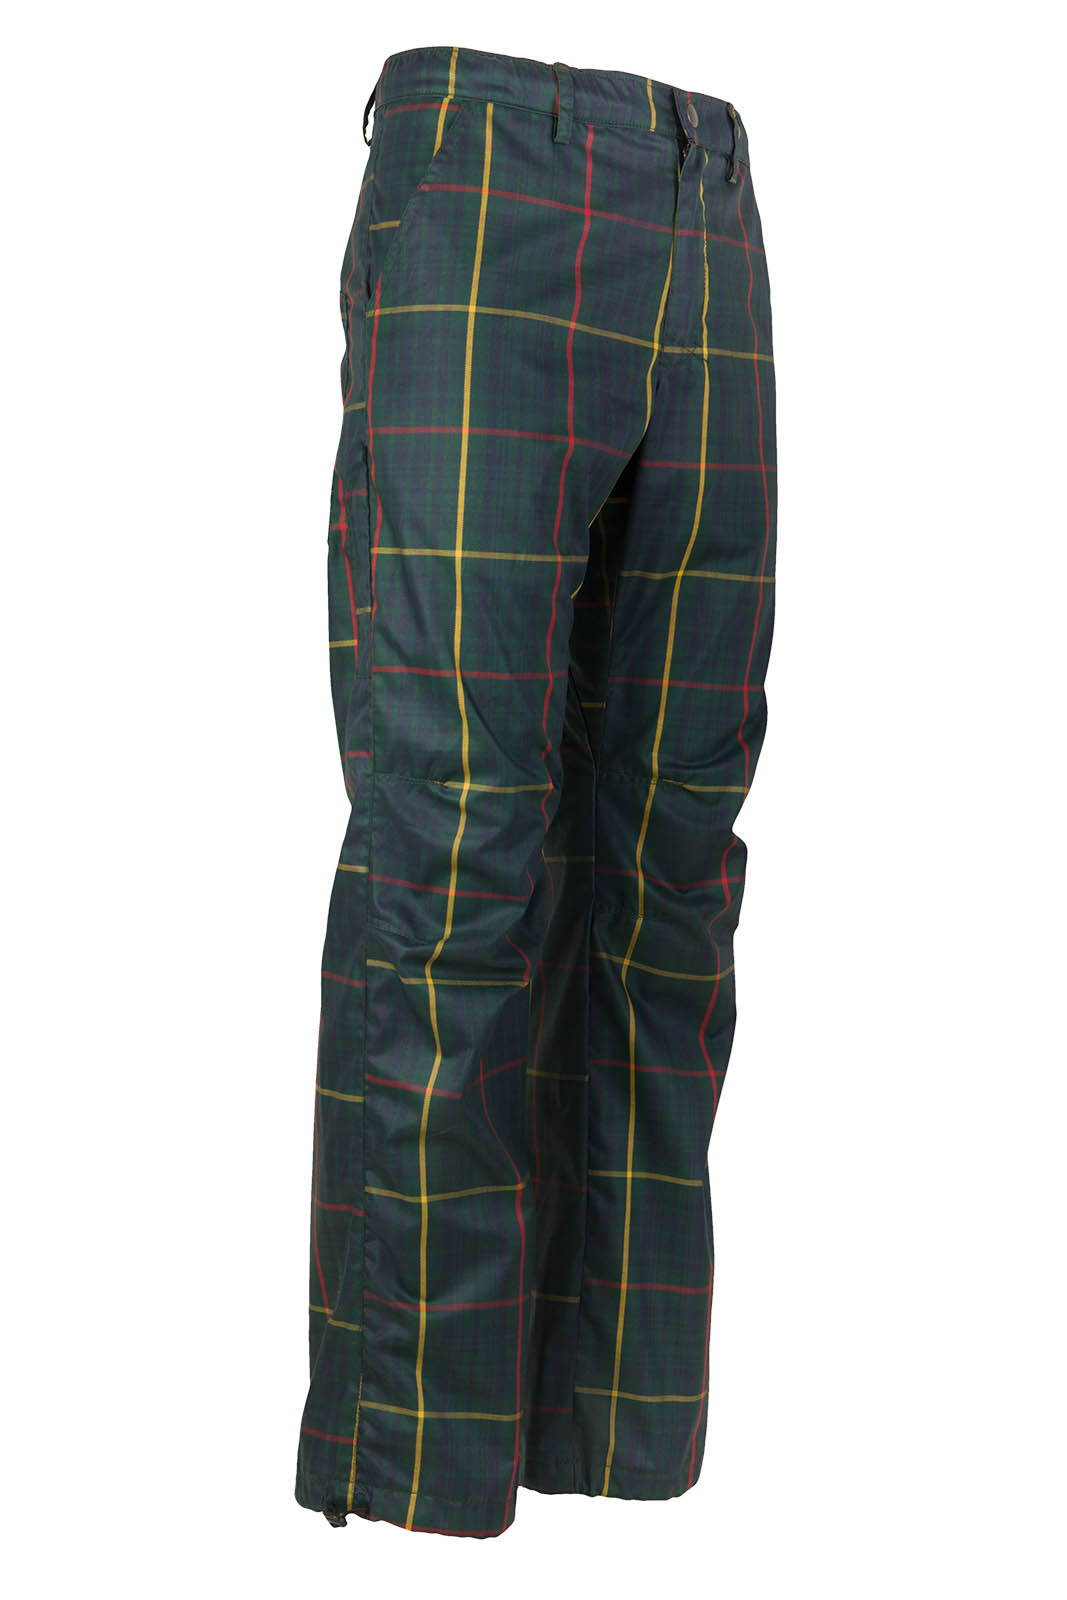 waterproof trousers for trekking men forest green Prince of Wales BILLY 2 Monvic